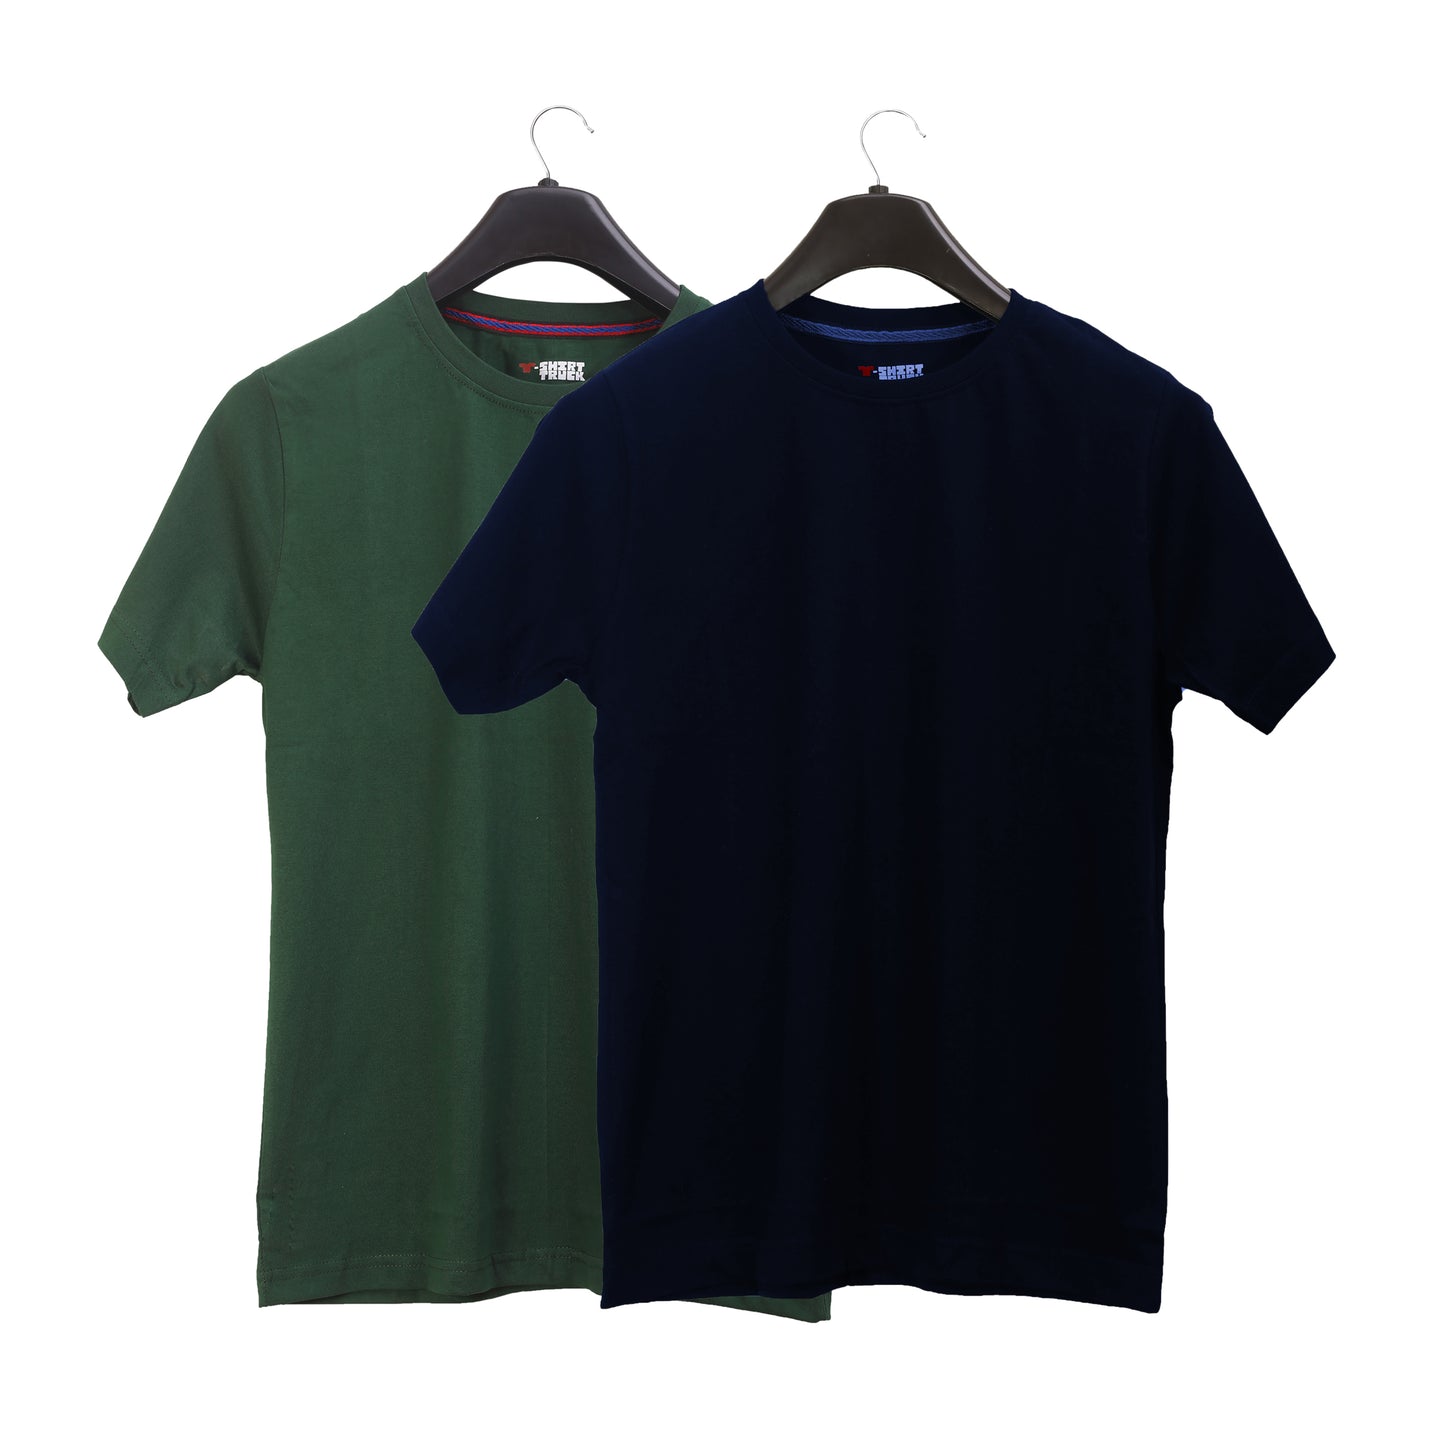 Unisex Round Neck Plain Solid Combo Pack of 2 T-shirts Green & Blue